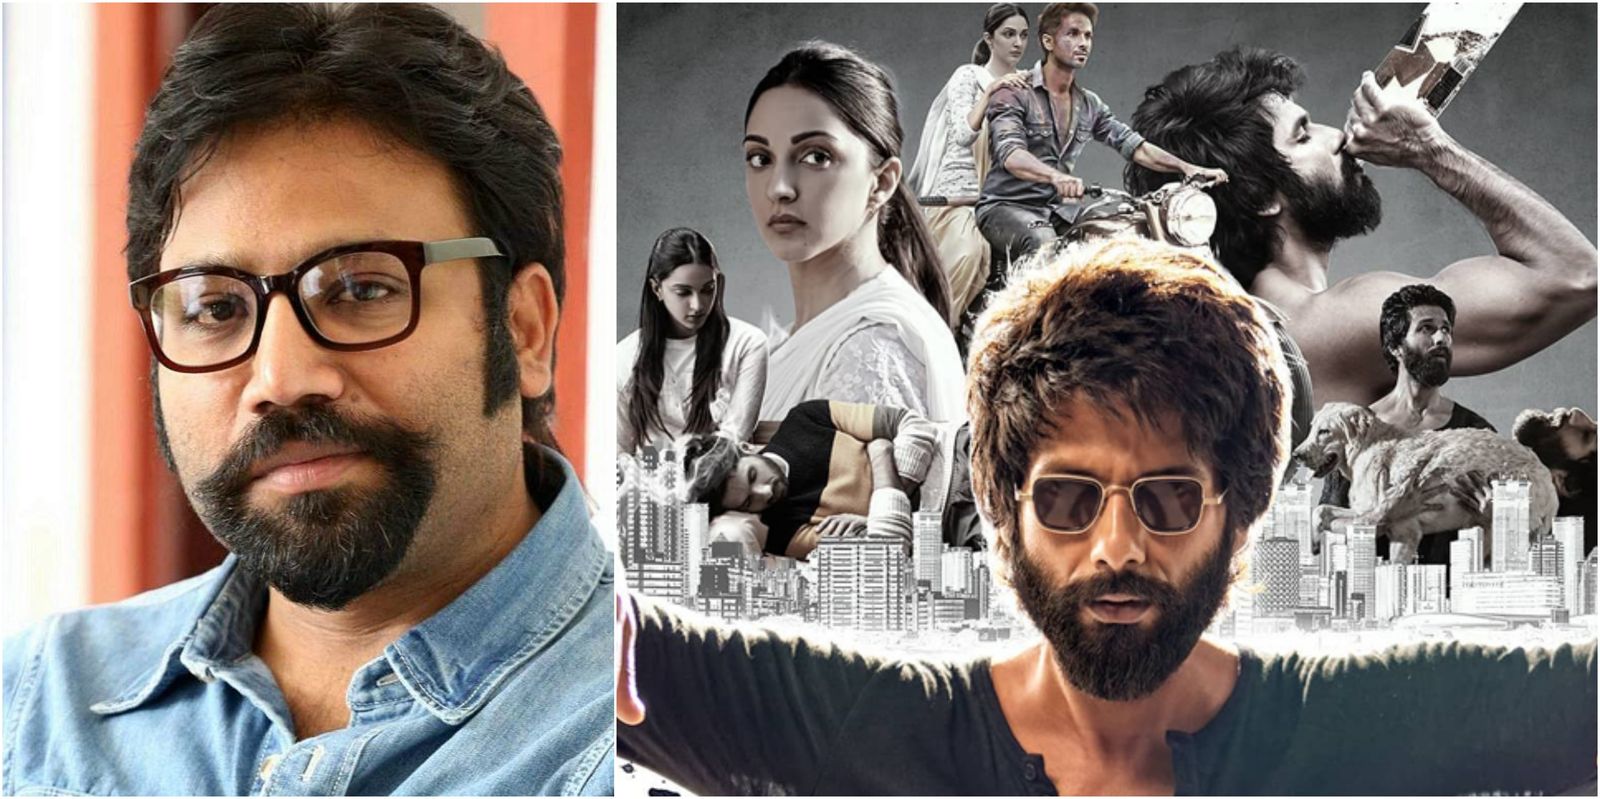 Kabir Singh Director Sandeep Reddy Vanga Gives An Explosive Interview, Says “If You Can’t Slap, If You Can’t Touch Your Woman Wherever You Want, I Don’t See Emotion There”